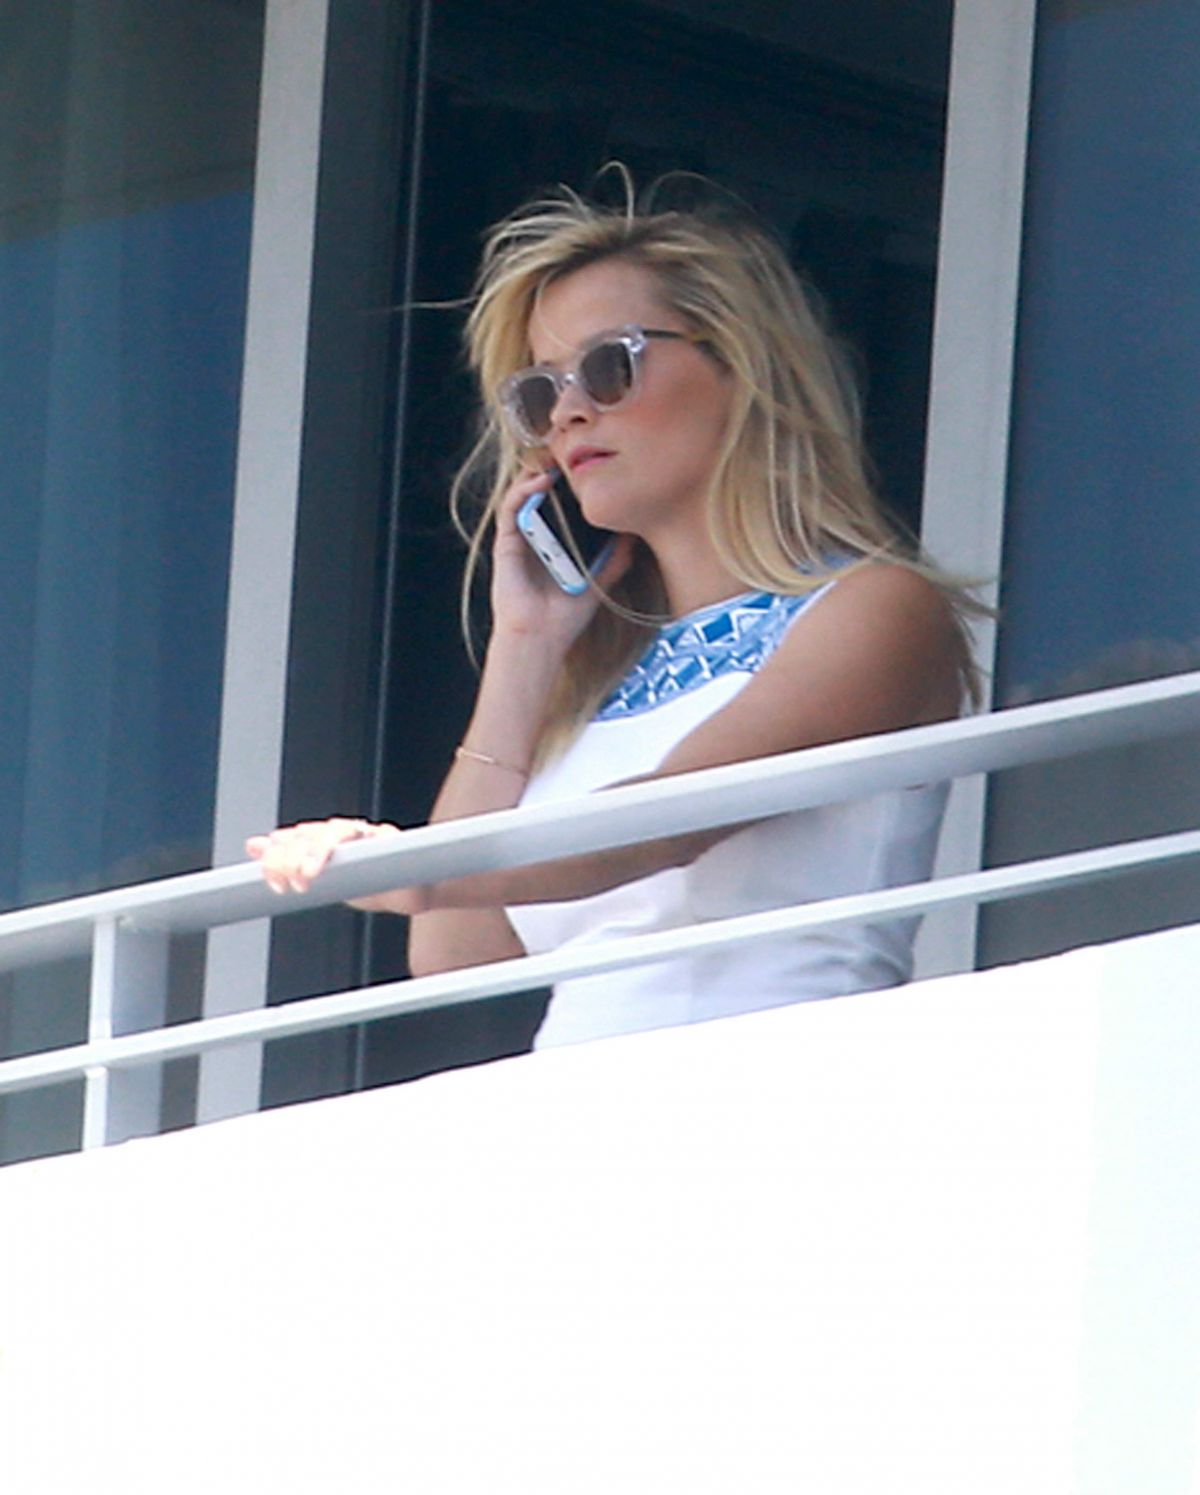 REESE WITHERSPOON at a Hotel Balcony in Miami 04/20/2015 – HawtCelebs